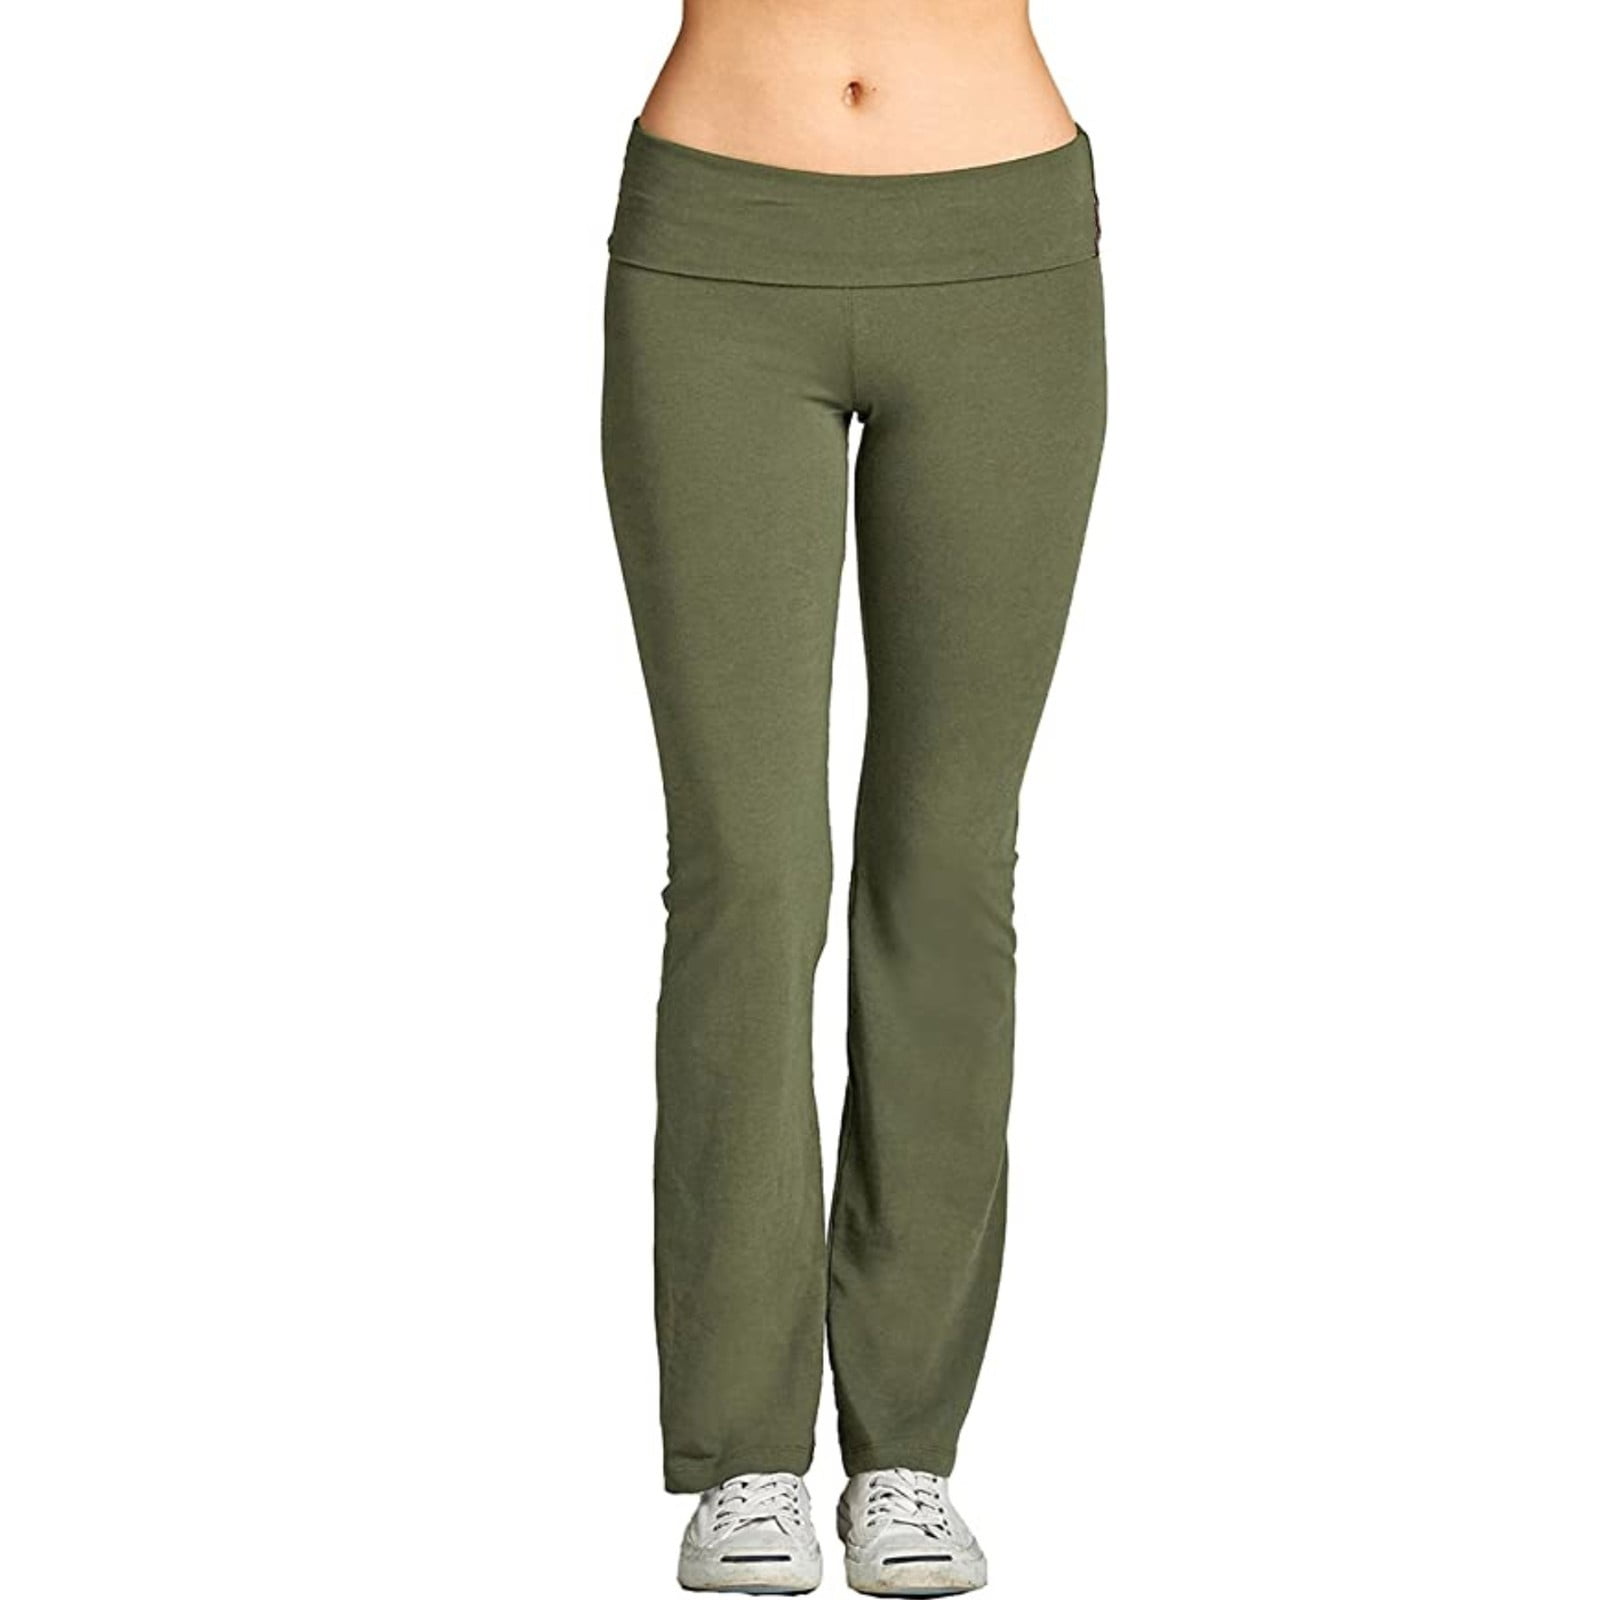 Honeeladyy Women Micro Flare Skinny Pants Casual Solid Color Trousers  Fashion Low Rise Pants Soft Stretch Workout Sweatpants Birthday Gifts for  Mum Army Green L 